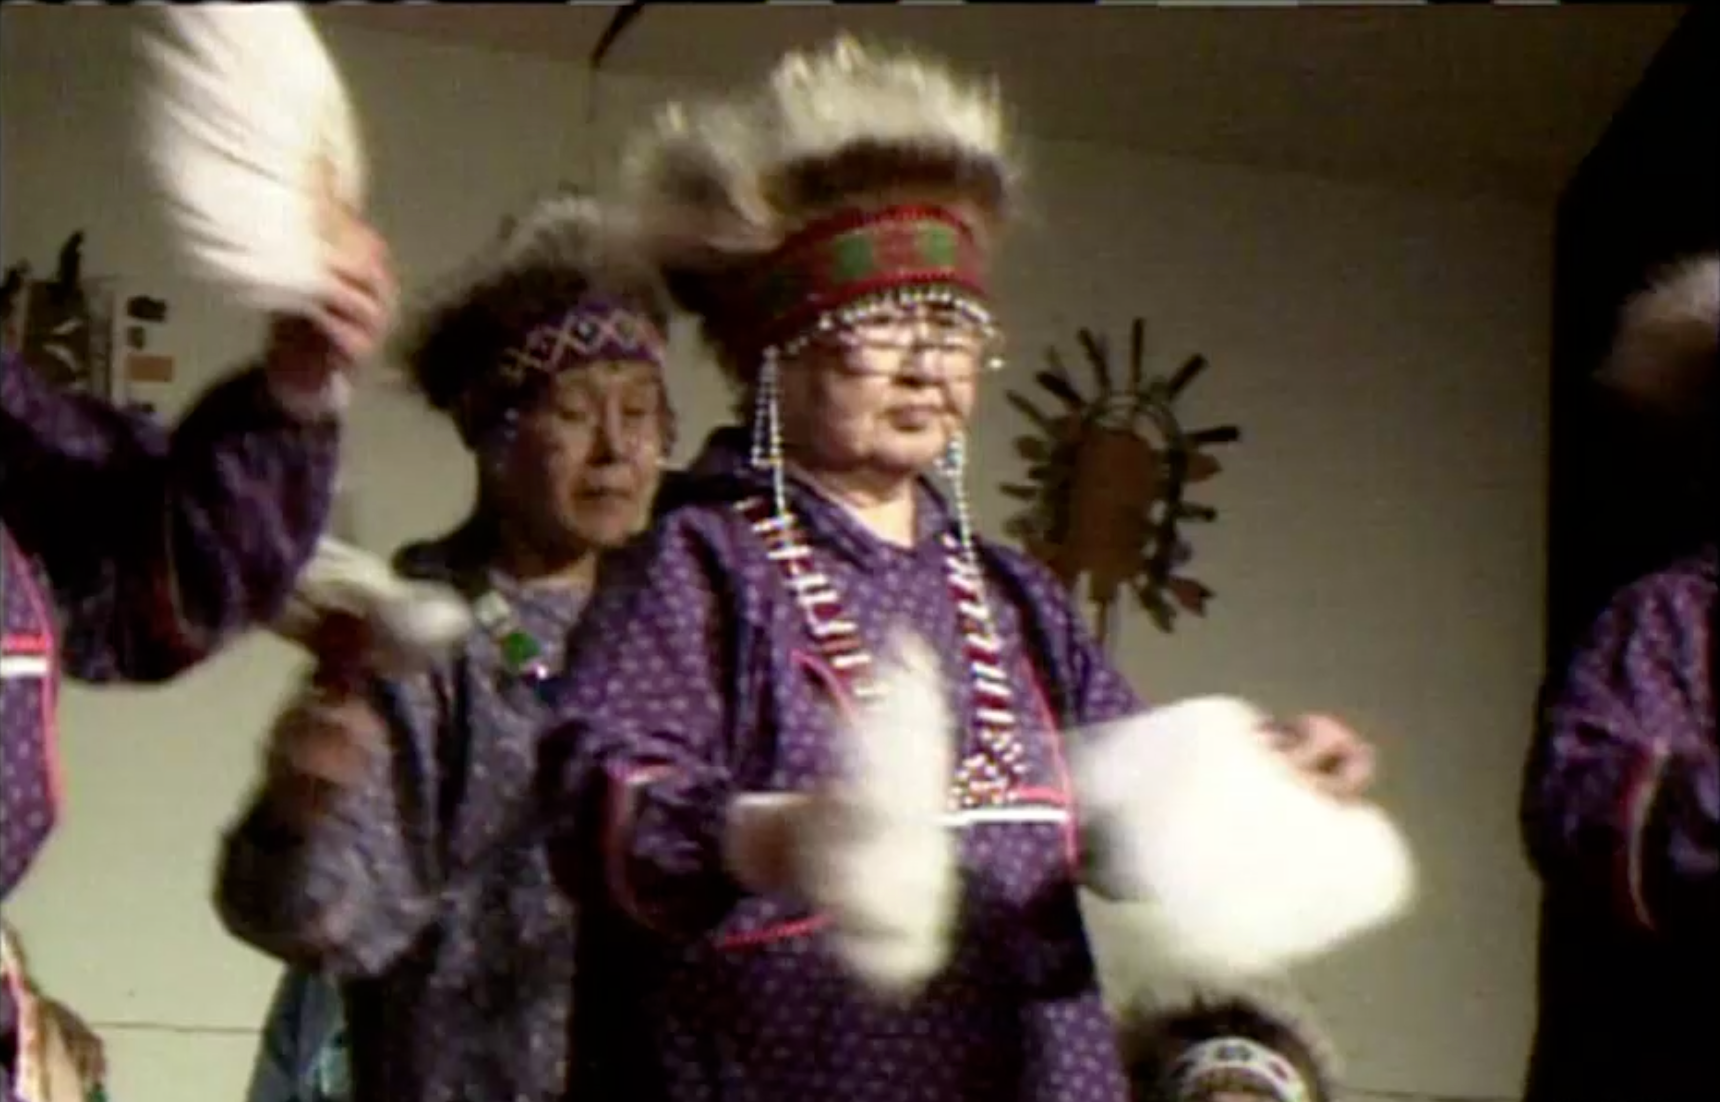 Three dancers in regalia hold objects as they dance.